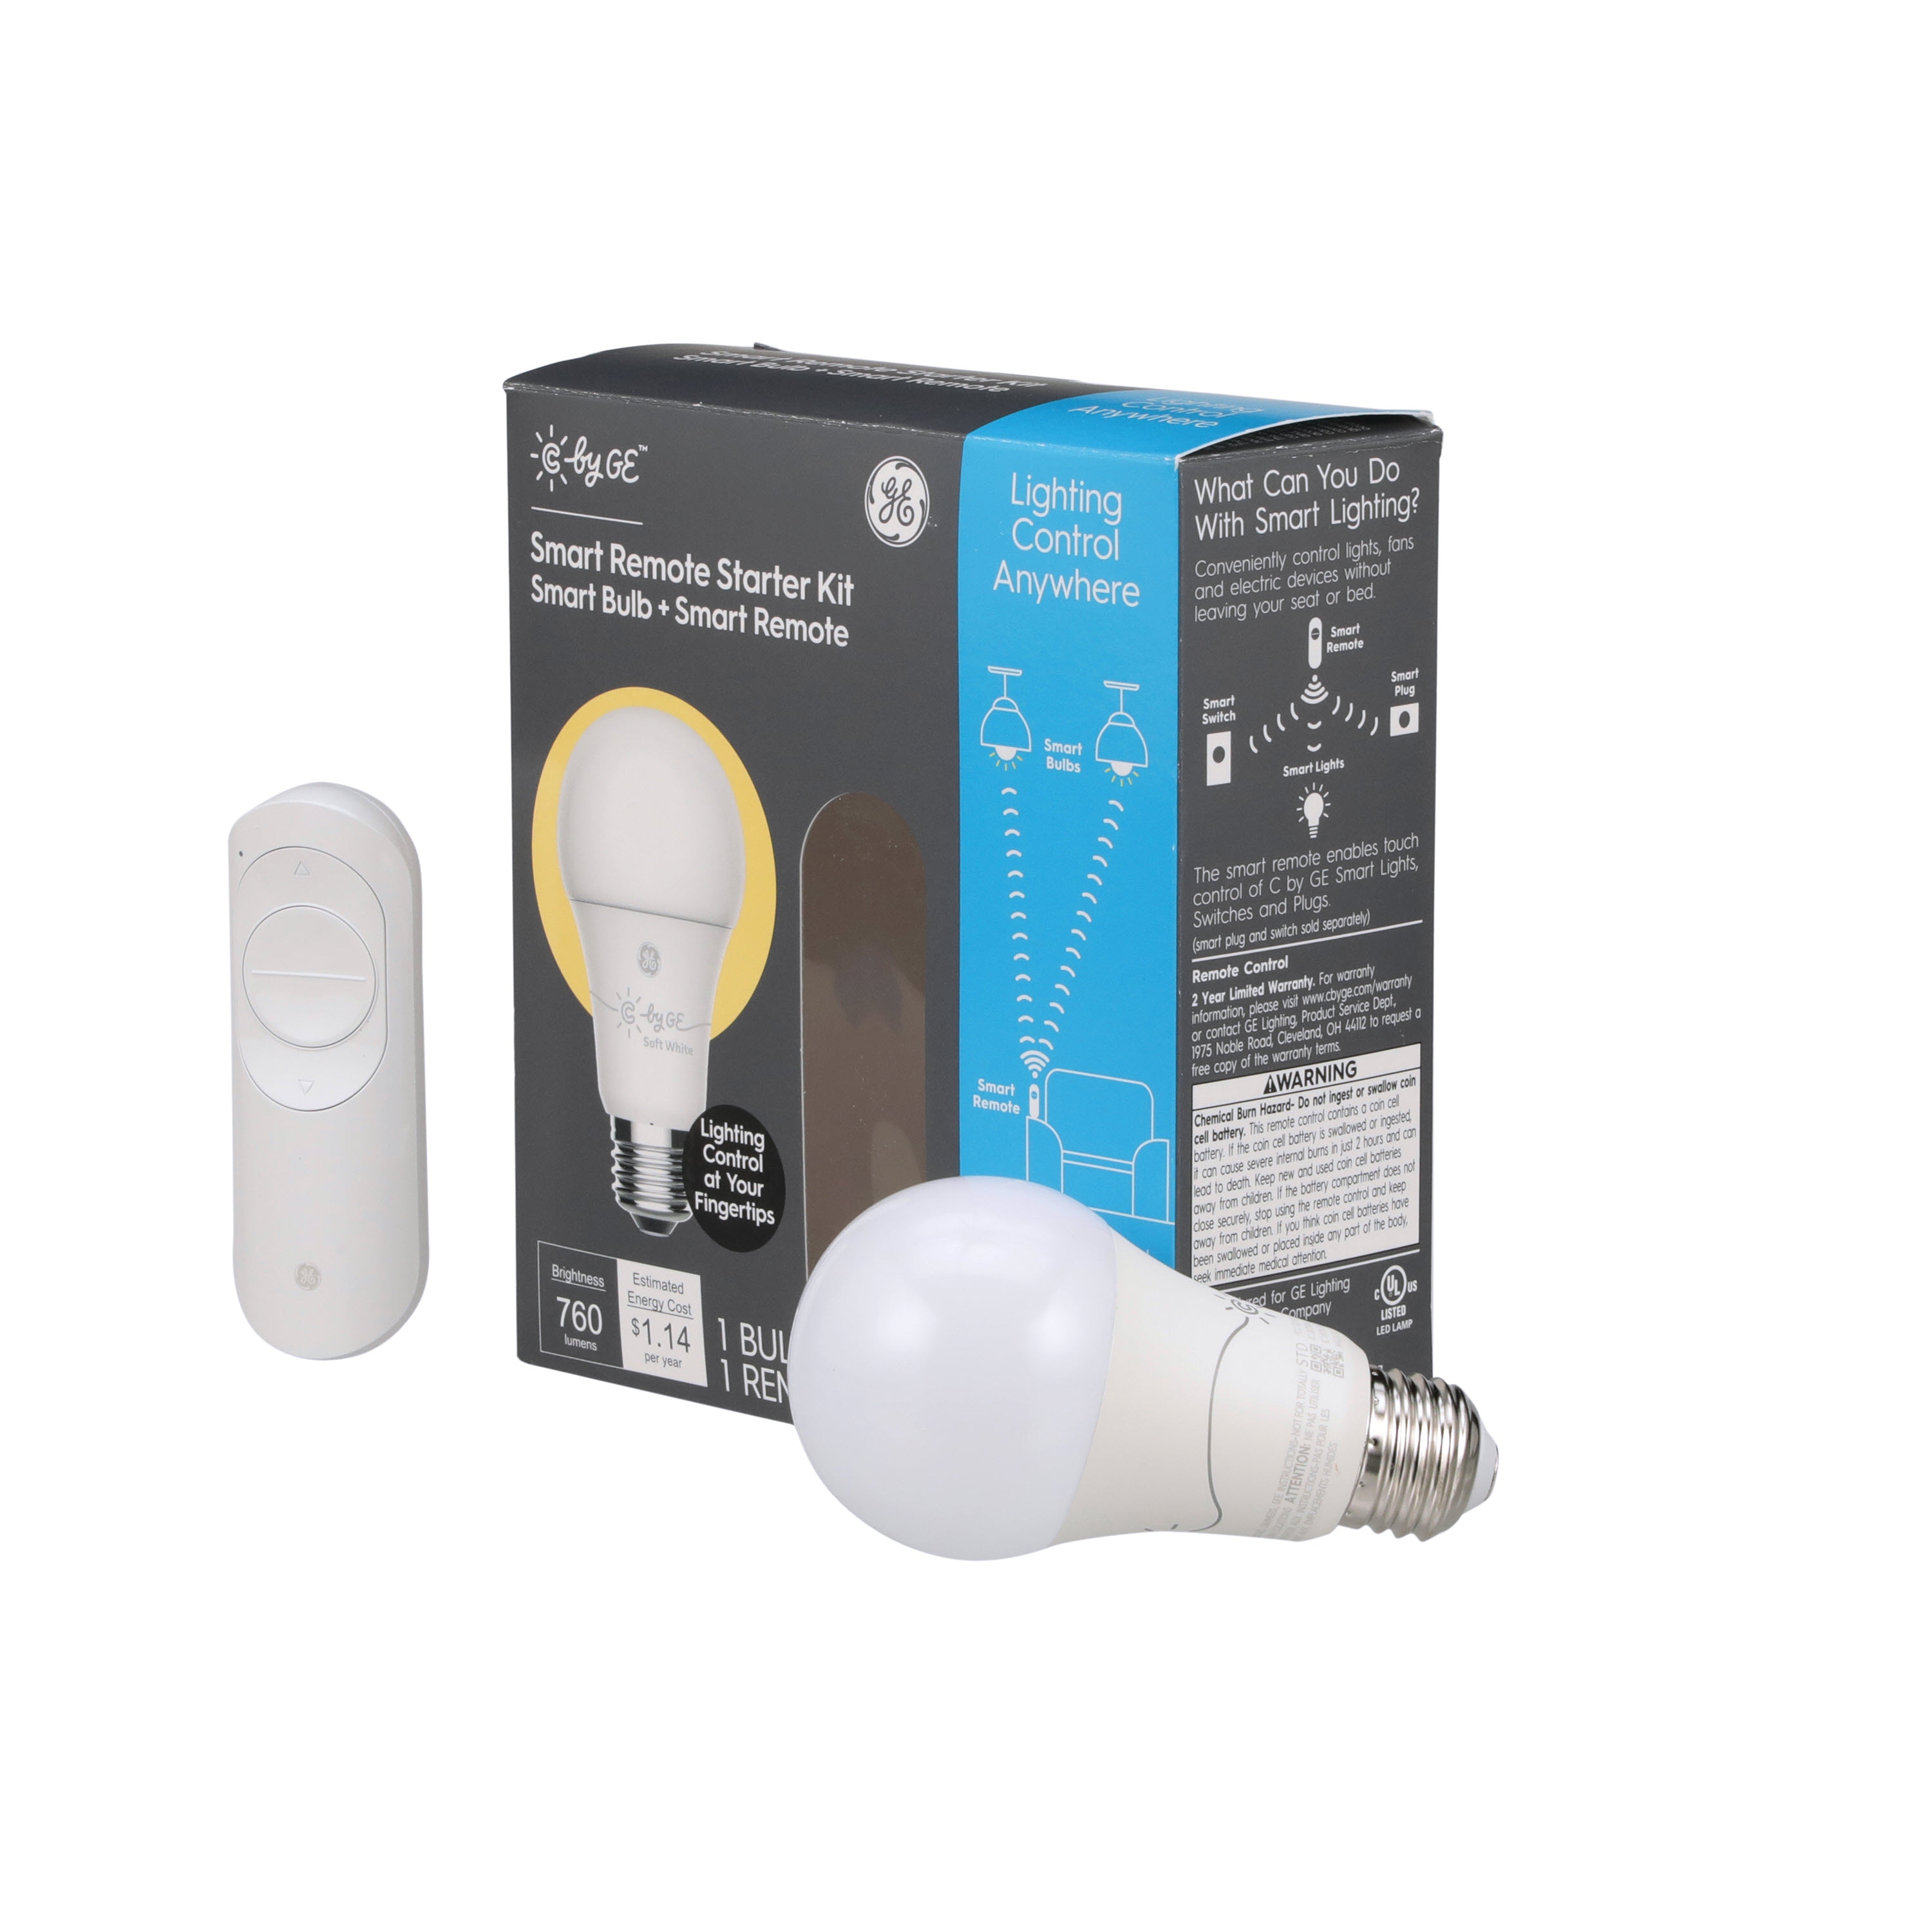 C by GE-Smart Remote Starter Home Kit White A19 Smart Bulb Google Alexa Dimmable 